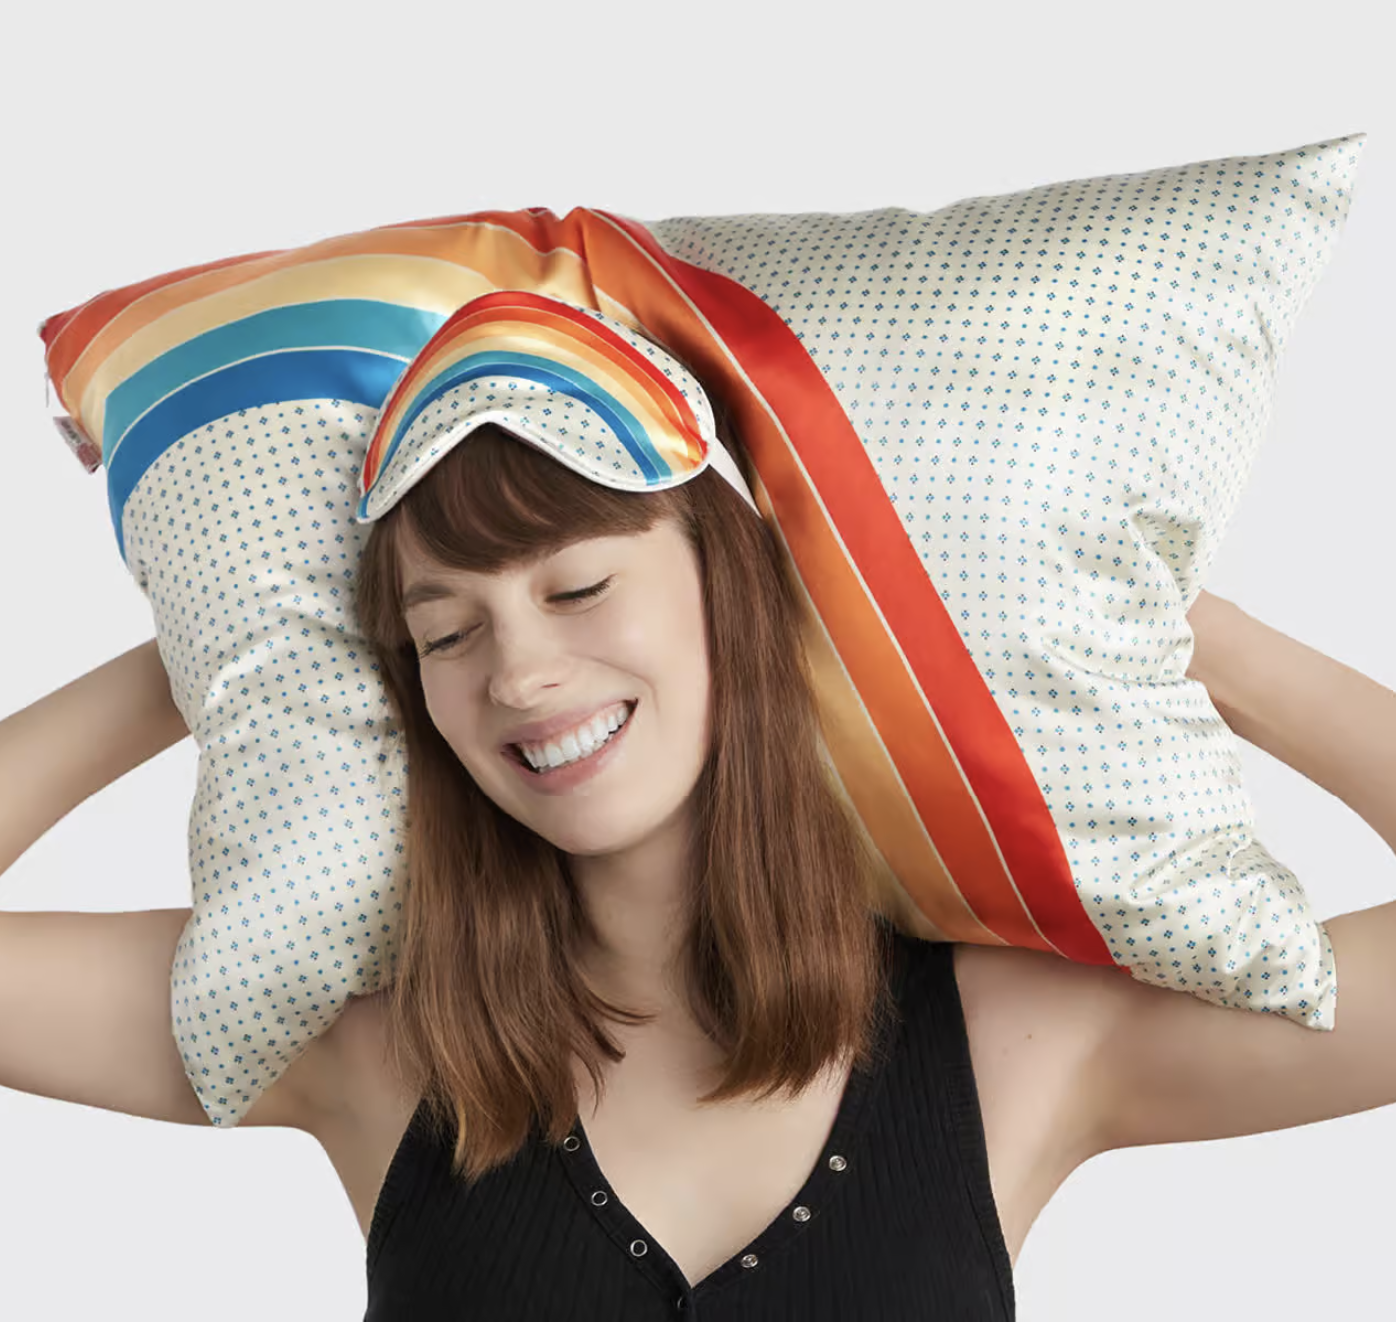 a person holding up a pillow with the pillowcase while wearing the eye mask